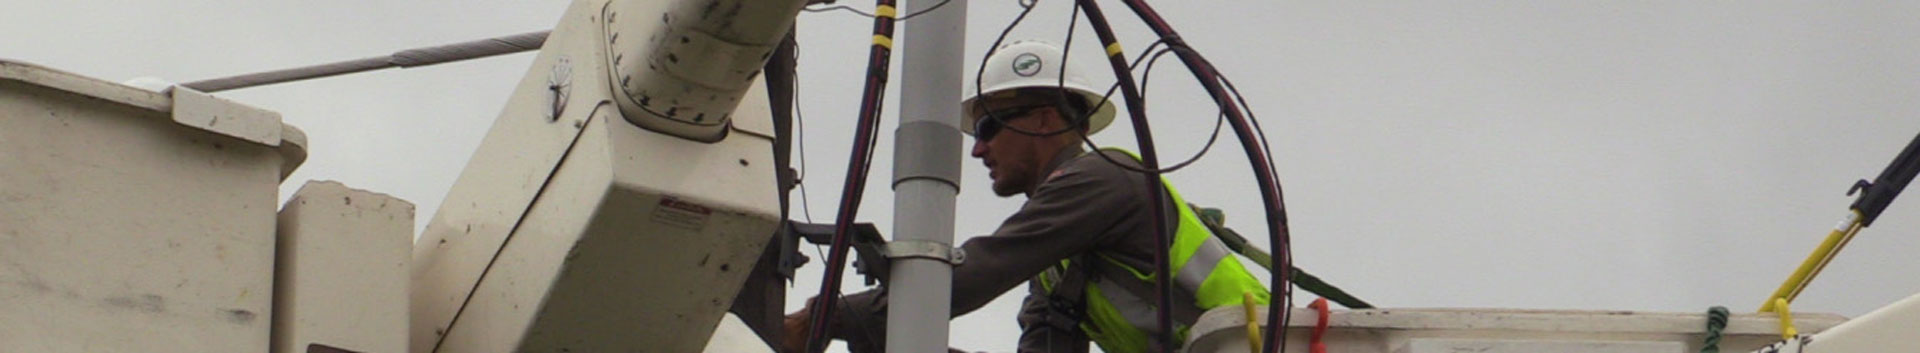 Photo of worker servicing equipment